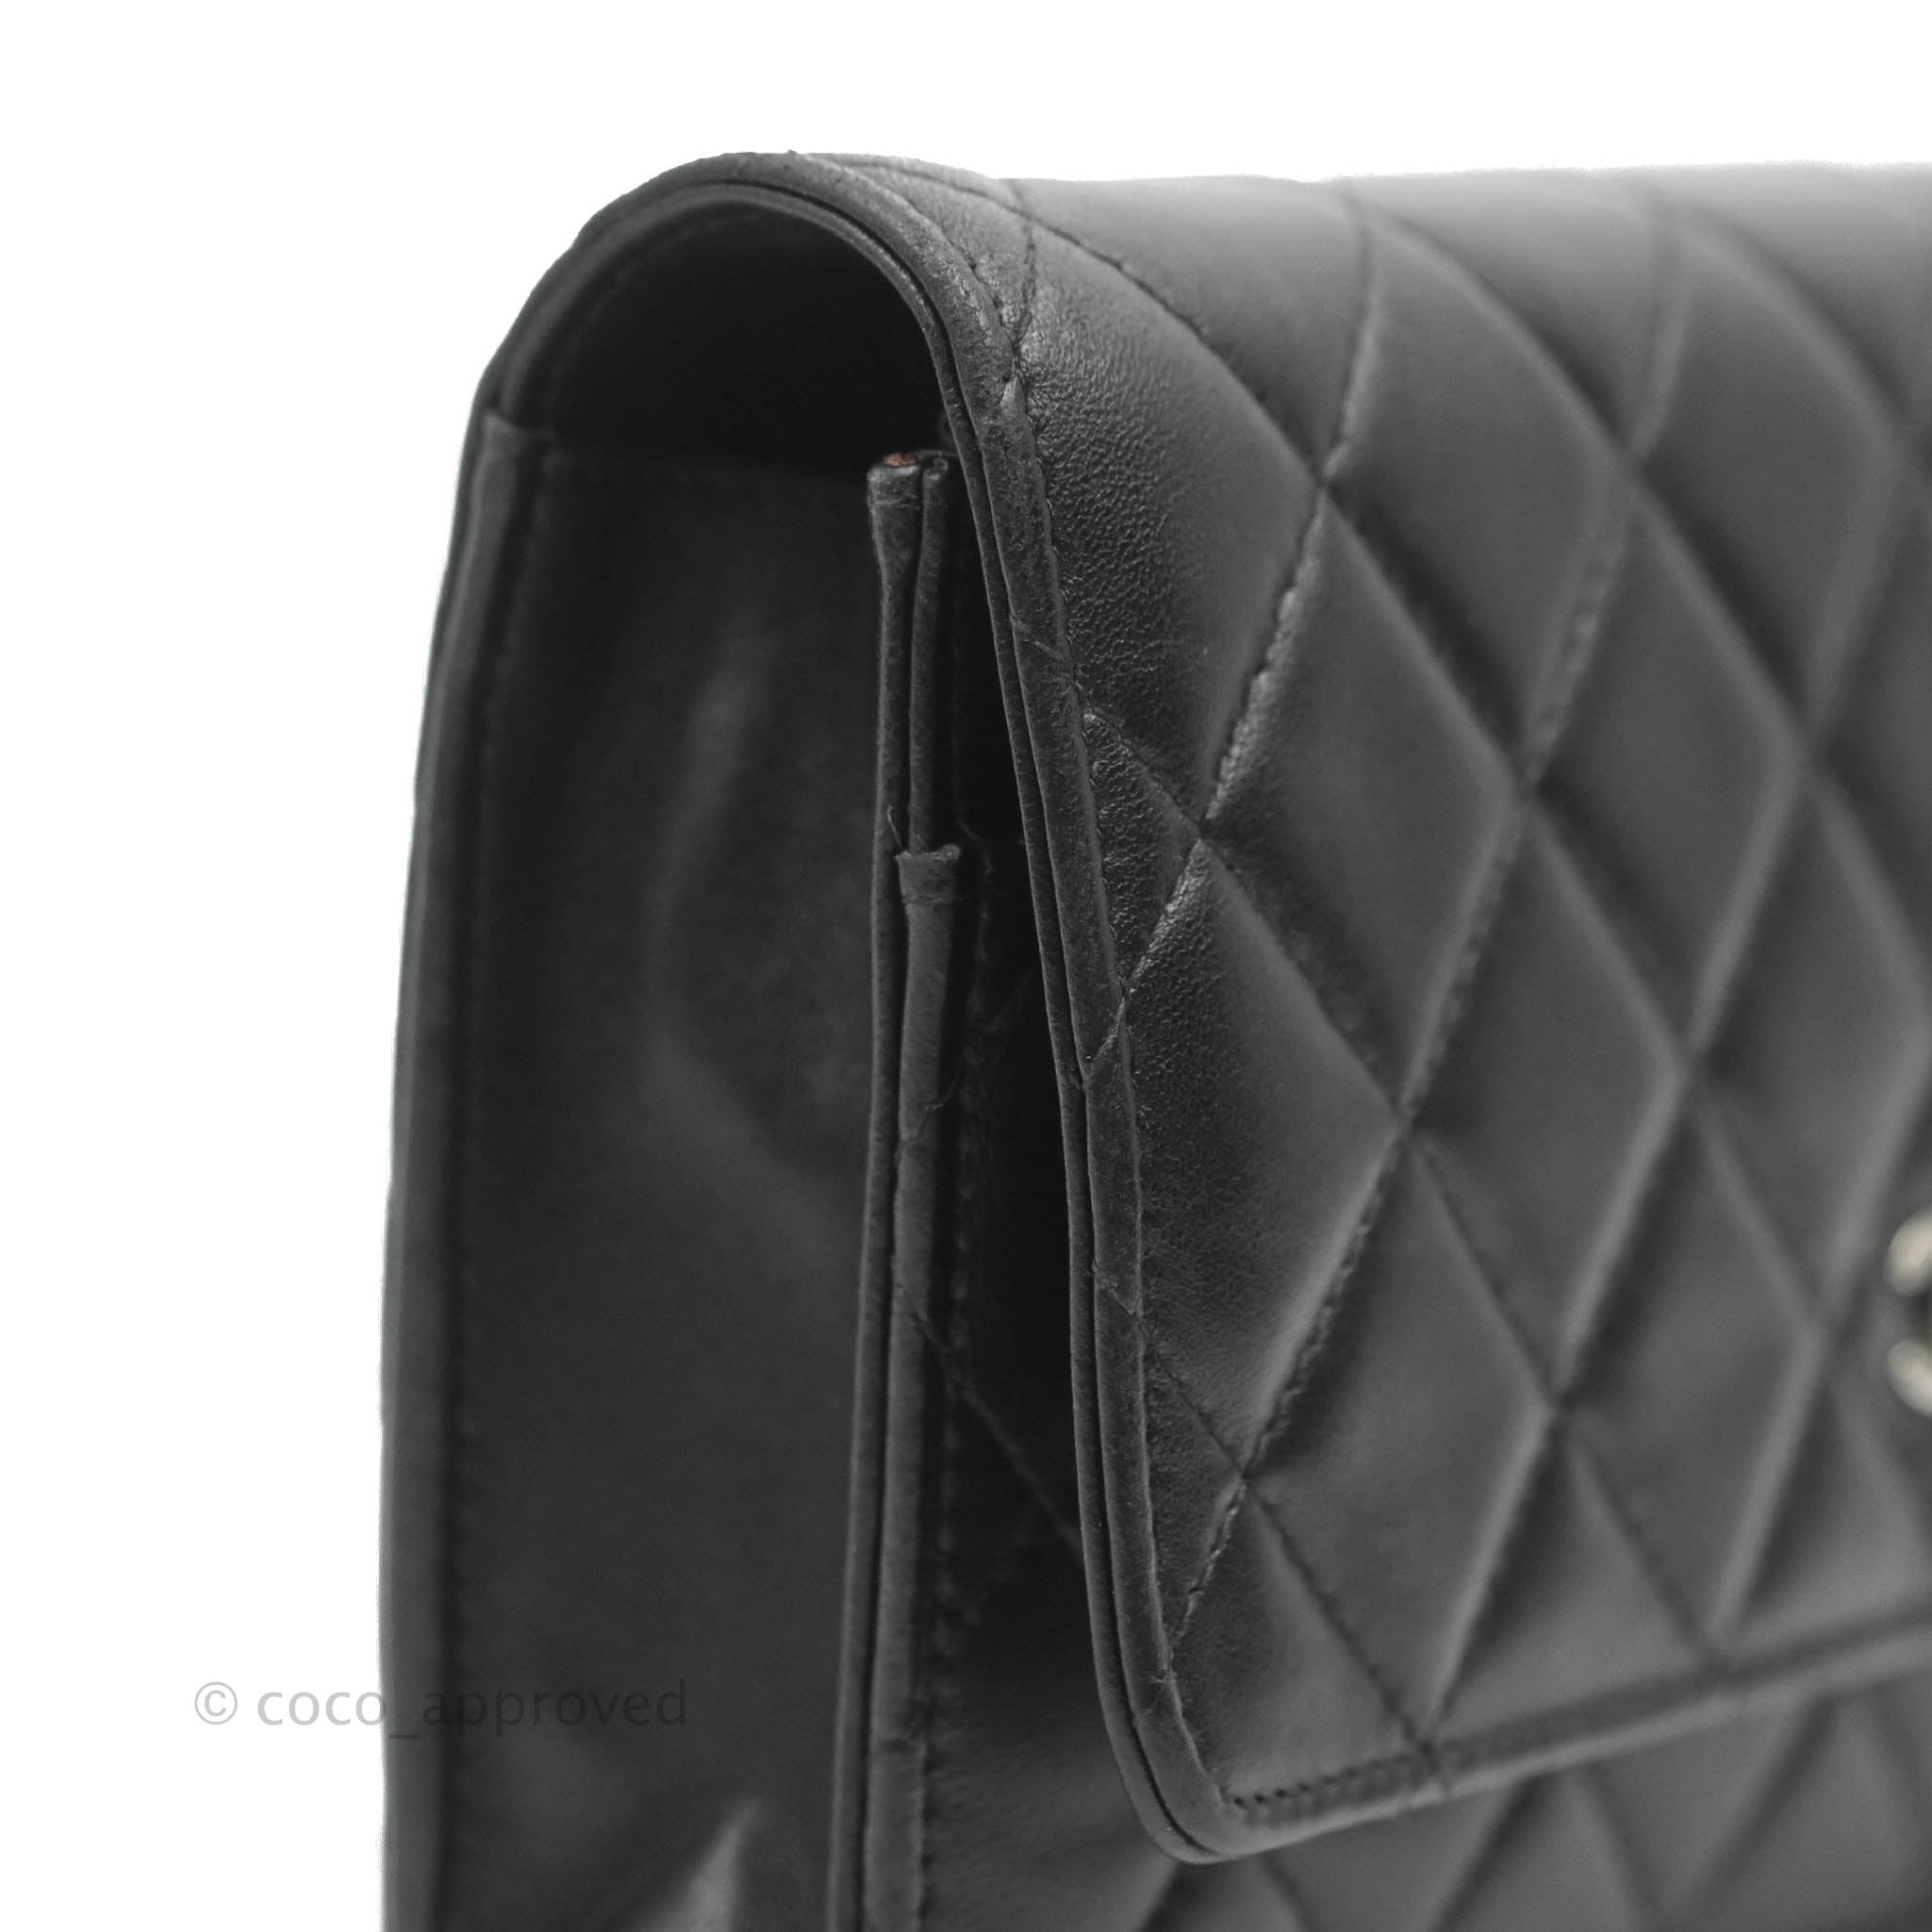 Chanel Quilted Wallet on Chain WOC Black Lambskin Silver Hardware